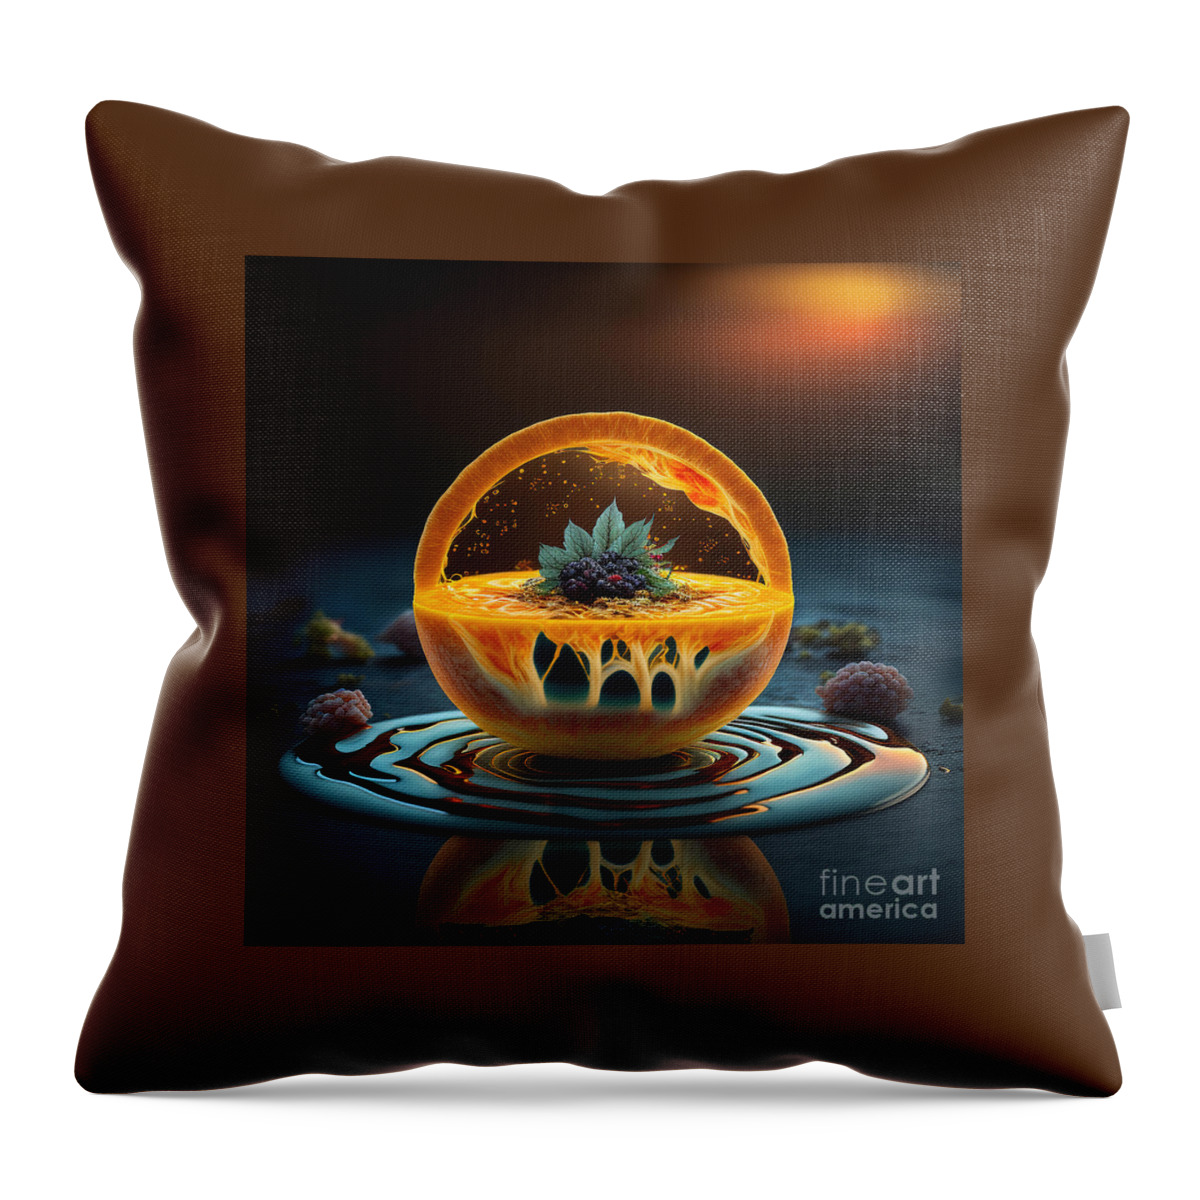 Collector Of Light Throw Pillow featuring the digital art Sol Citrico by Jay Schankman